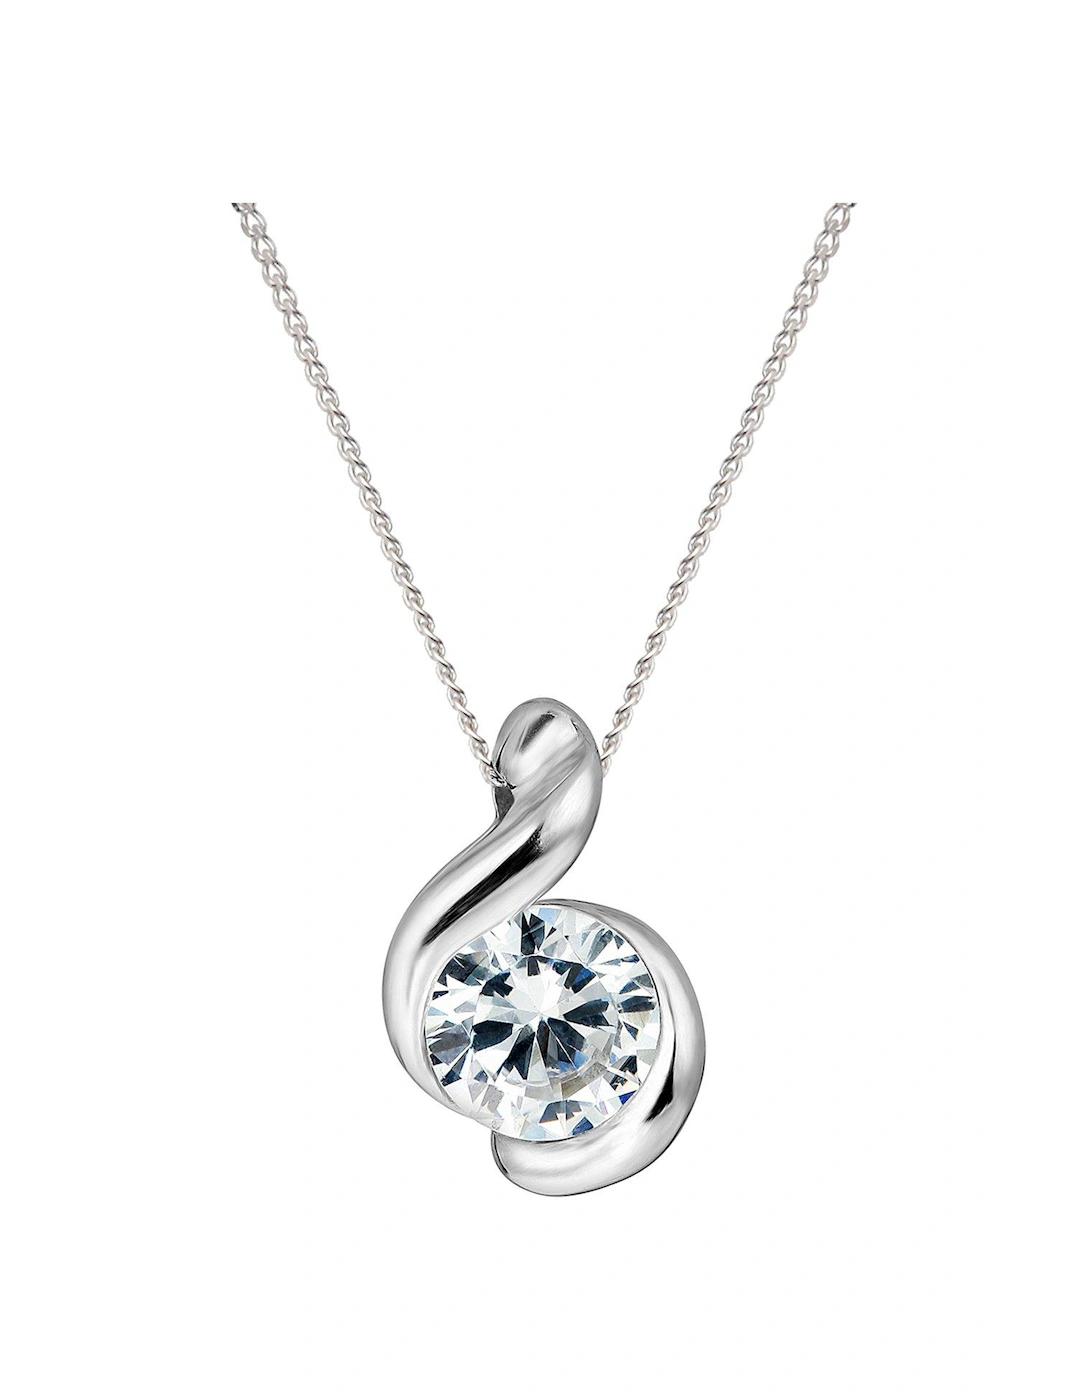 9ct White Gold 5mm Cubic Zirconia Swirl Pendant Necklace 18 Inch Curb Chain, 3 of 2